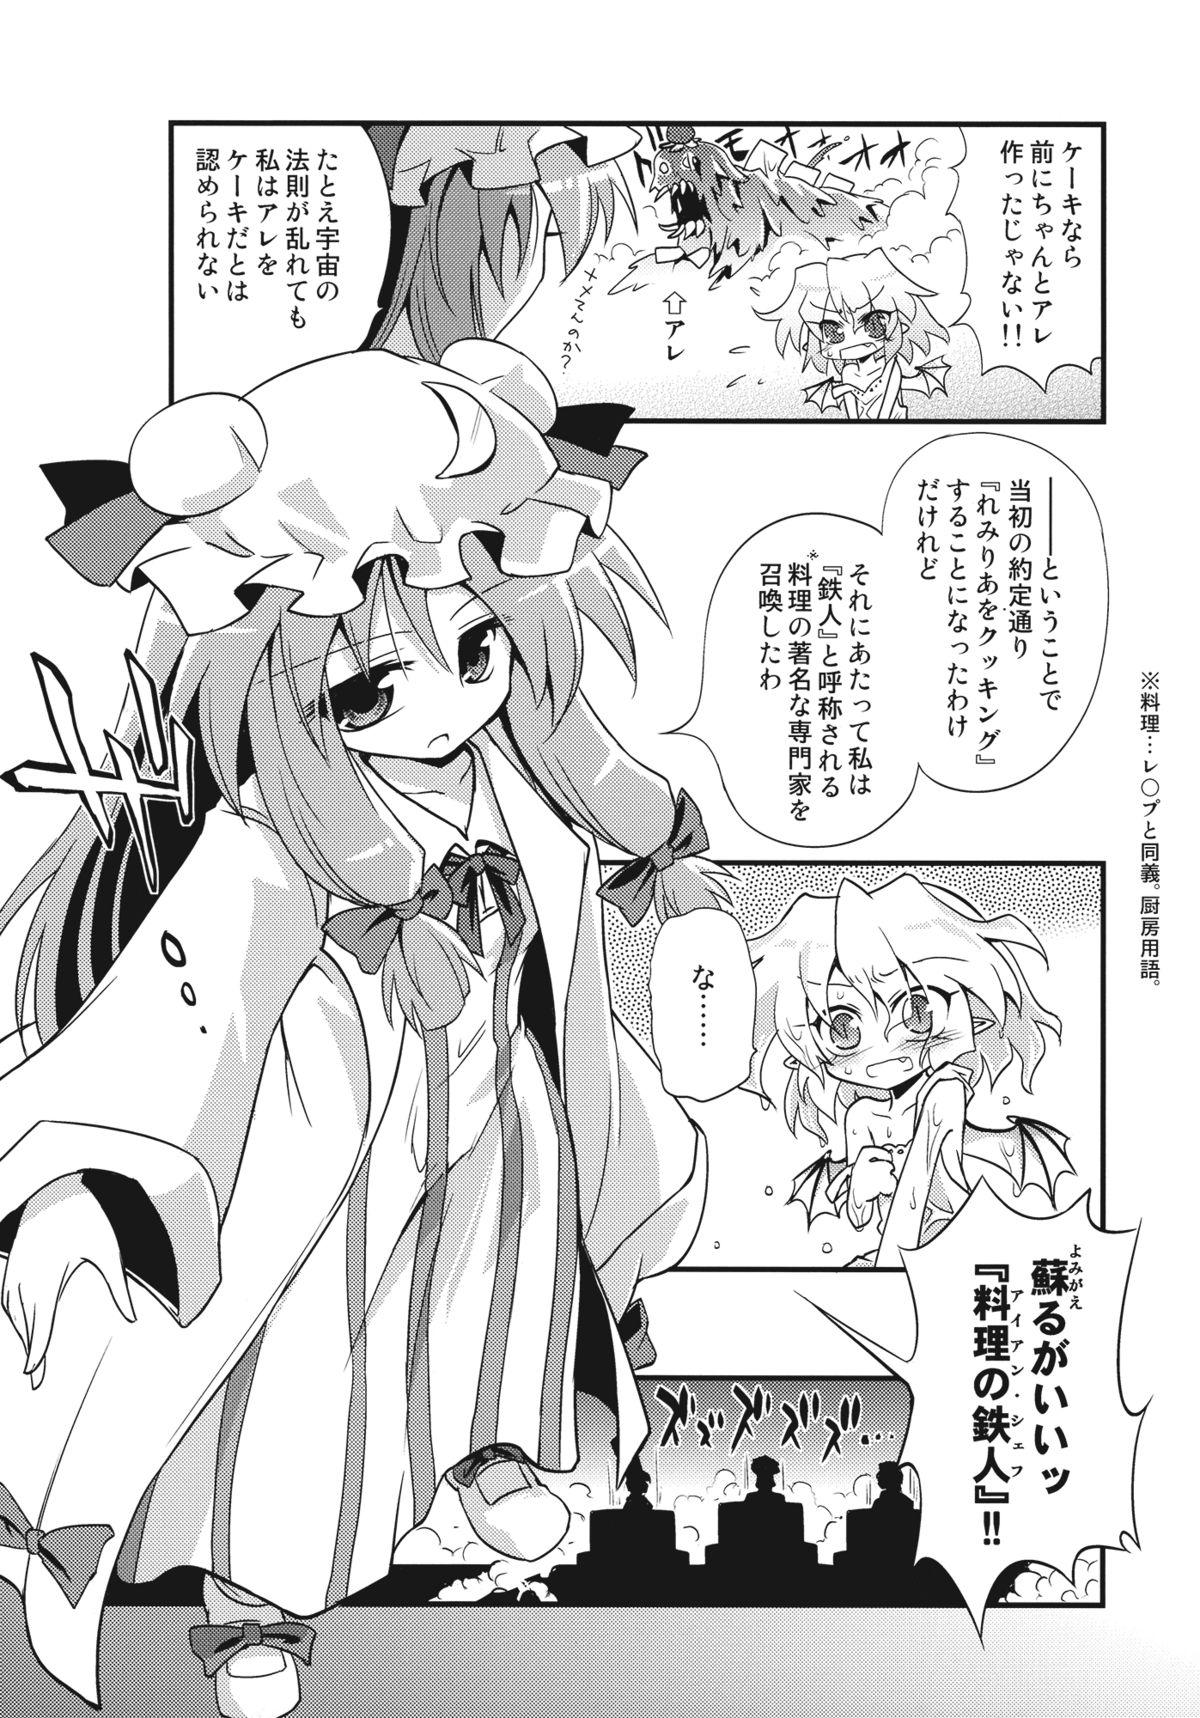 Banging Remilia wo Cooking!! - Touhou project Rough Sex - Page 4